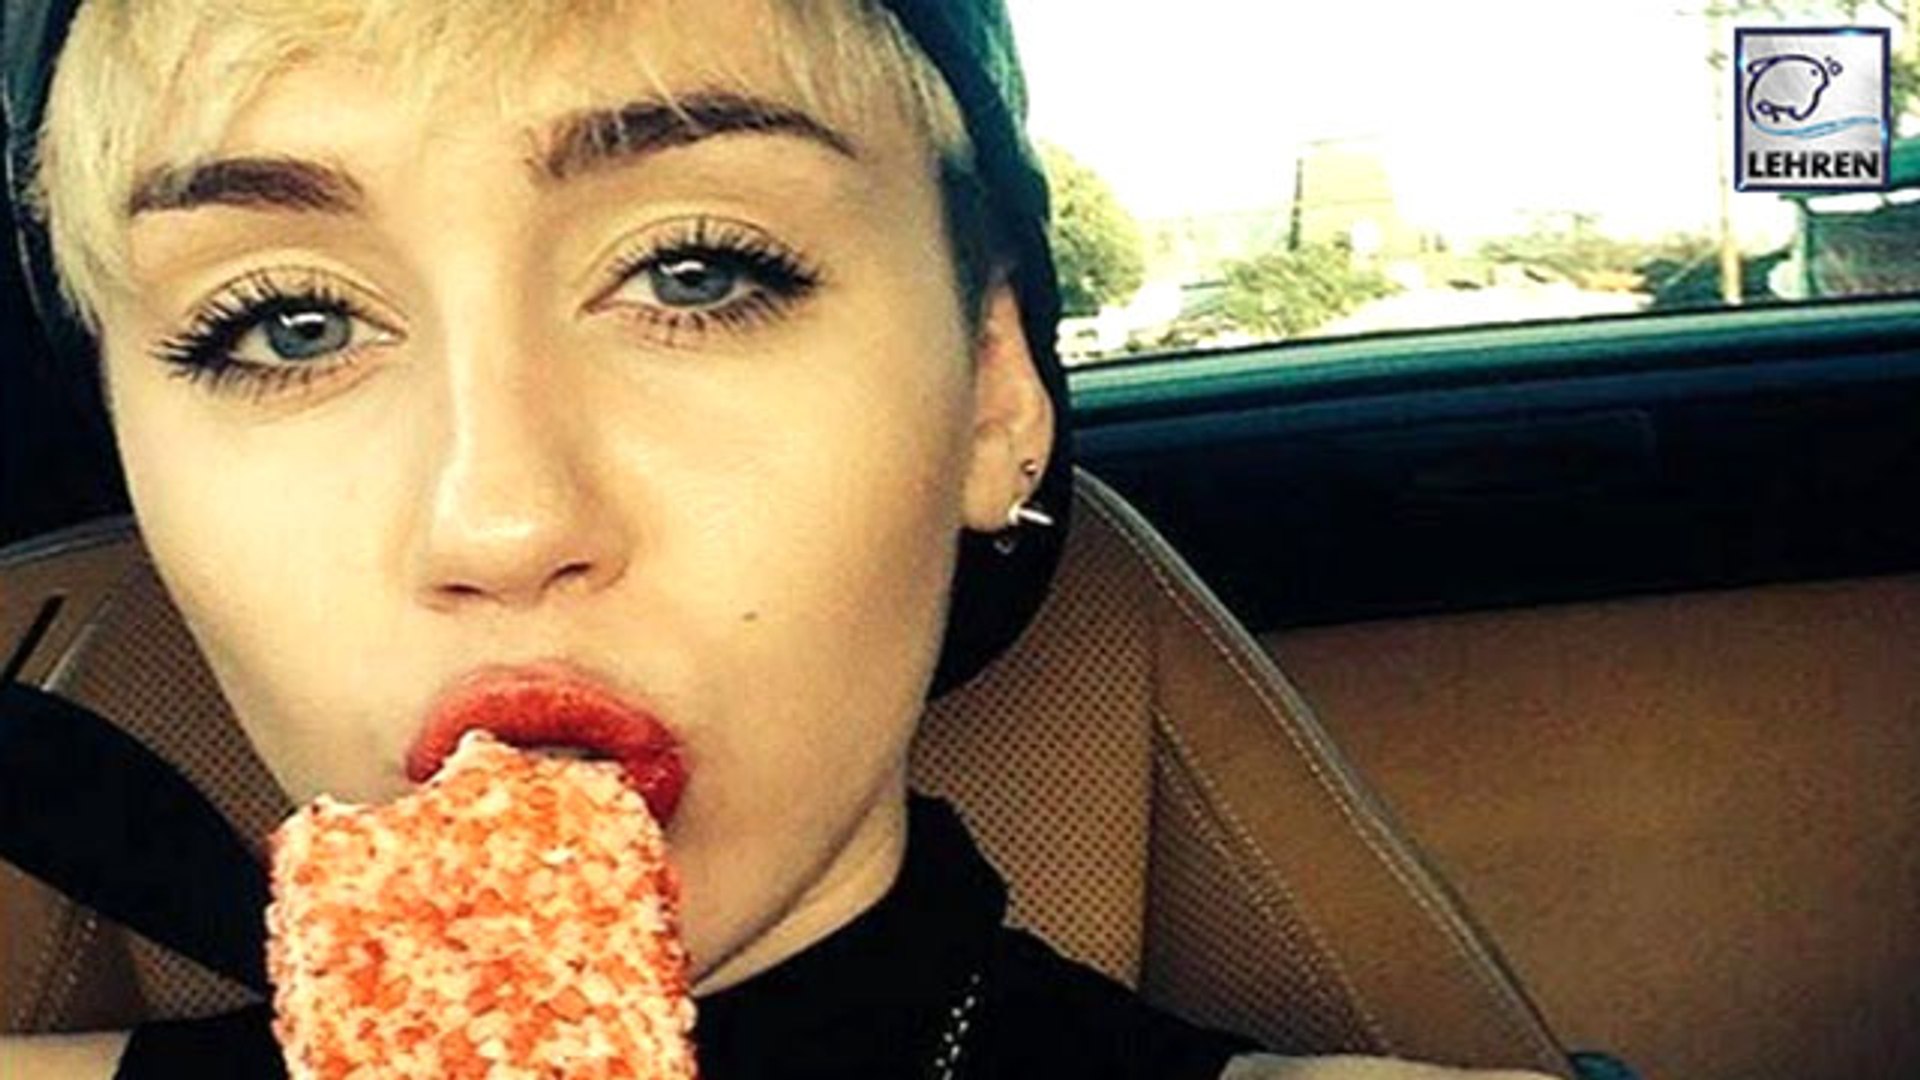 Miley Cyrus Says THIS THING Has Changed Her Thoughts On Having Kids